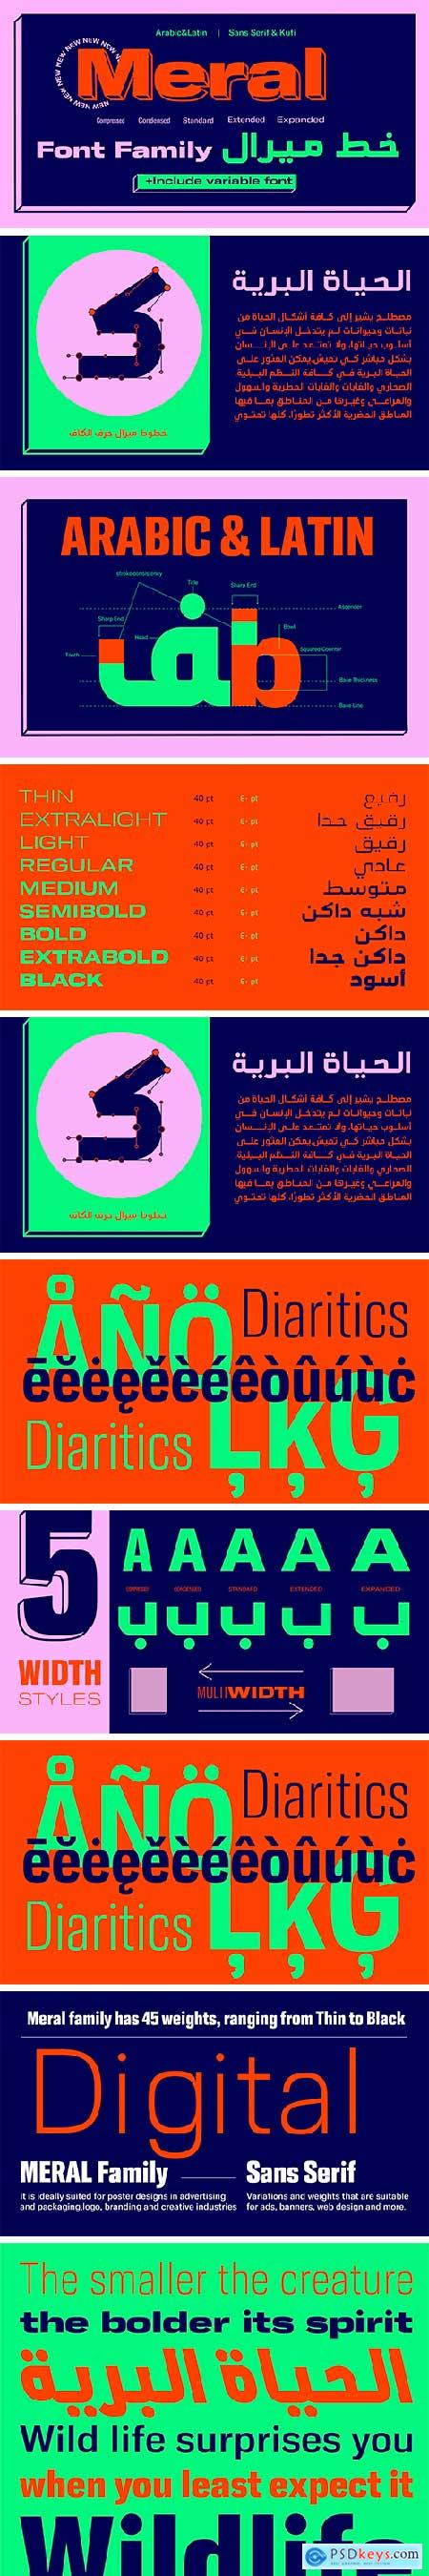 Meral Font Family